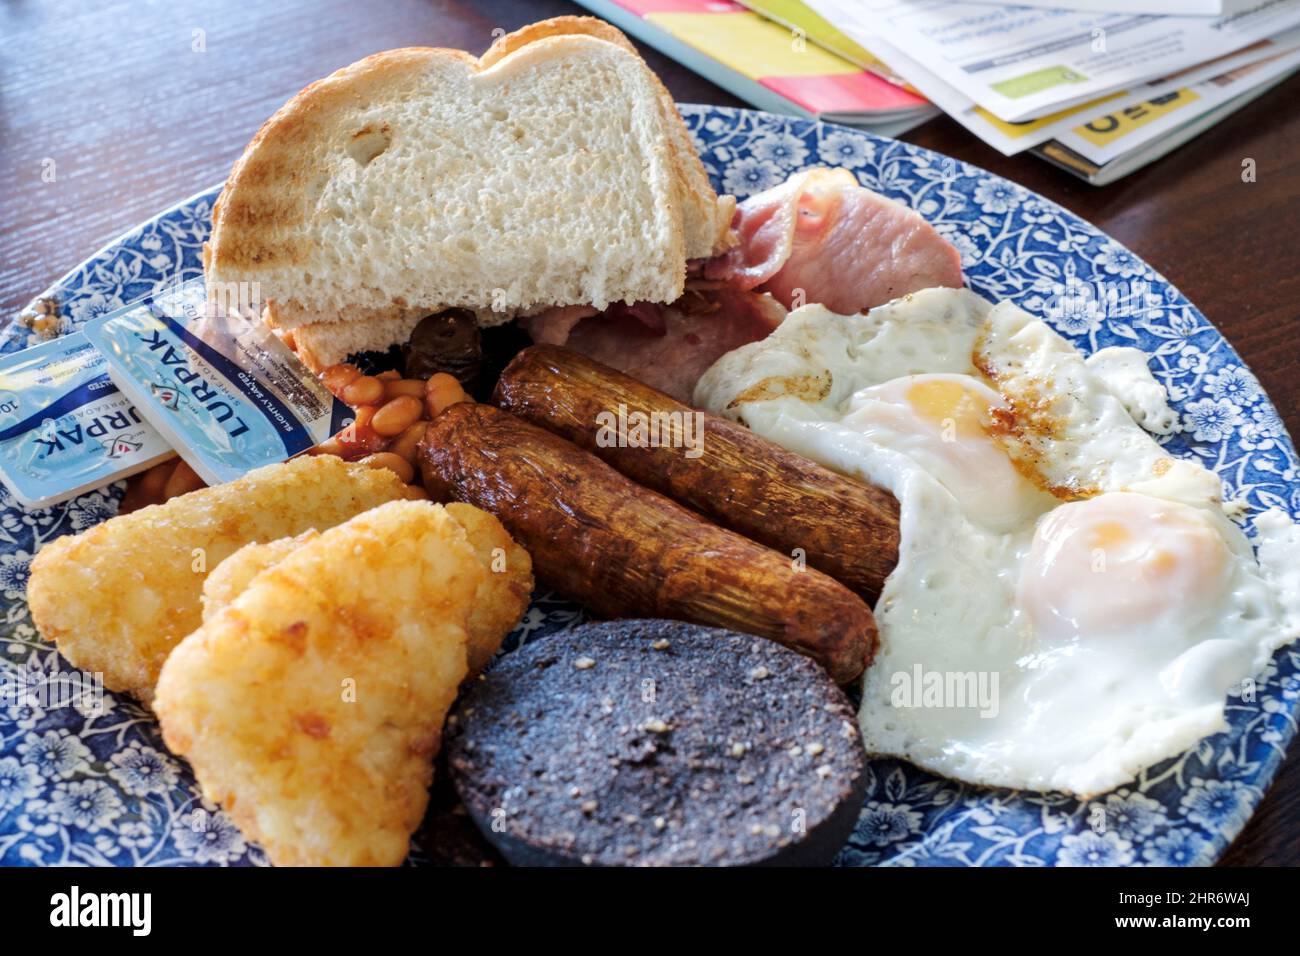 A Wetherspoons large breakfast served in a Wetherspoons pub. The breakfast is 1406 calories. The additional black pudding adds an extra 352 calories Stock Photo